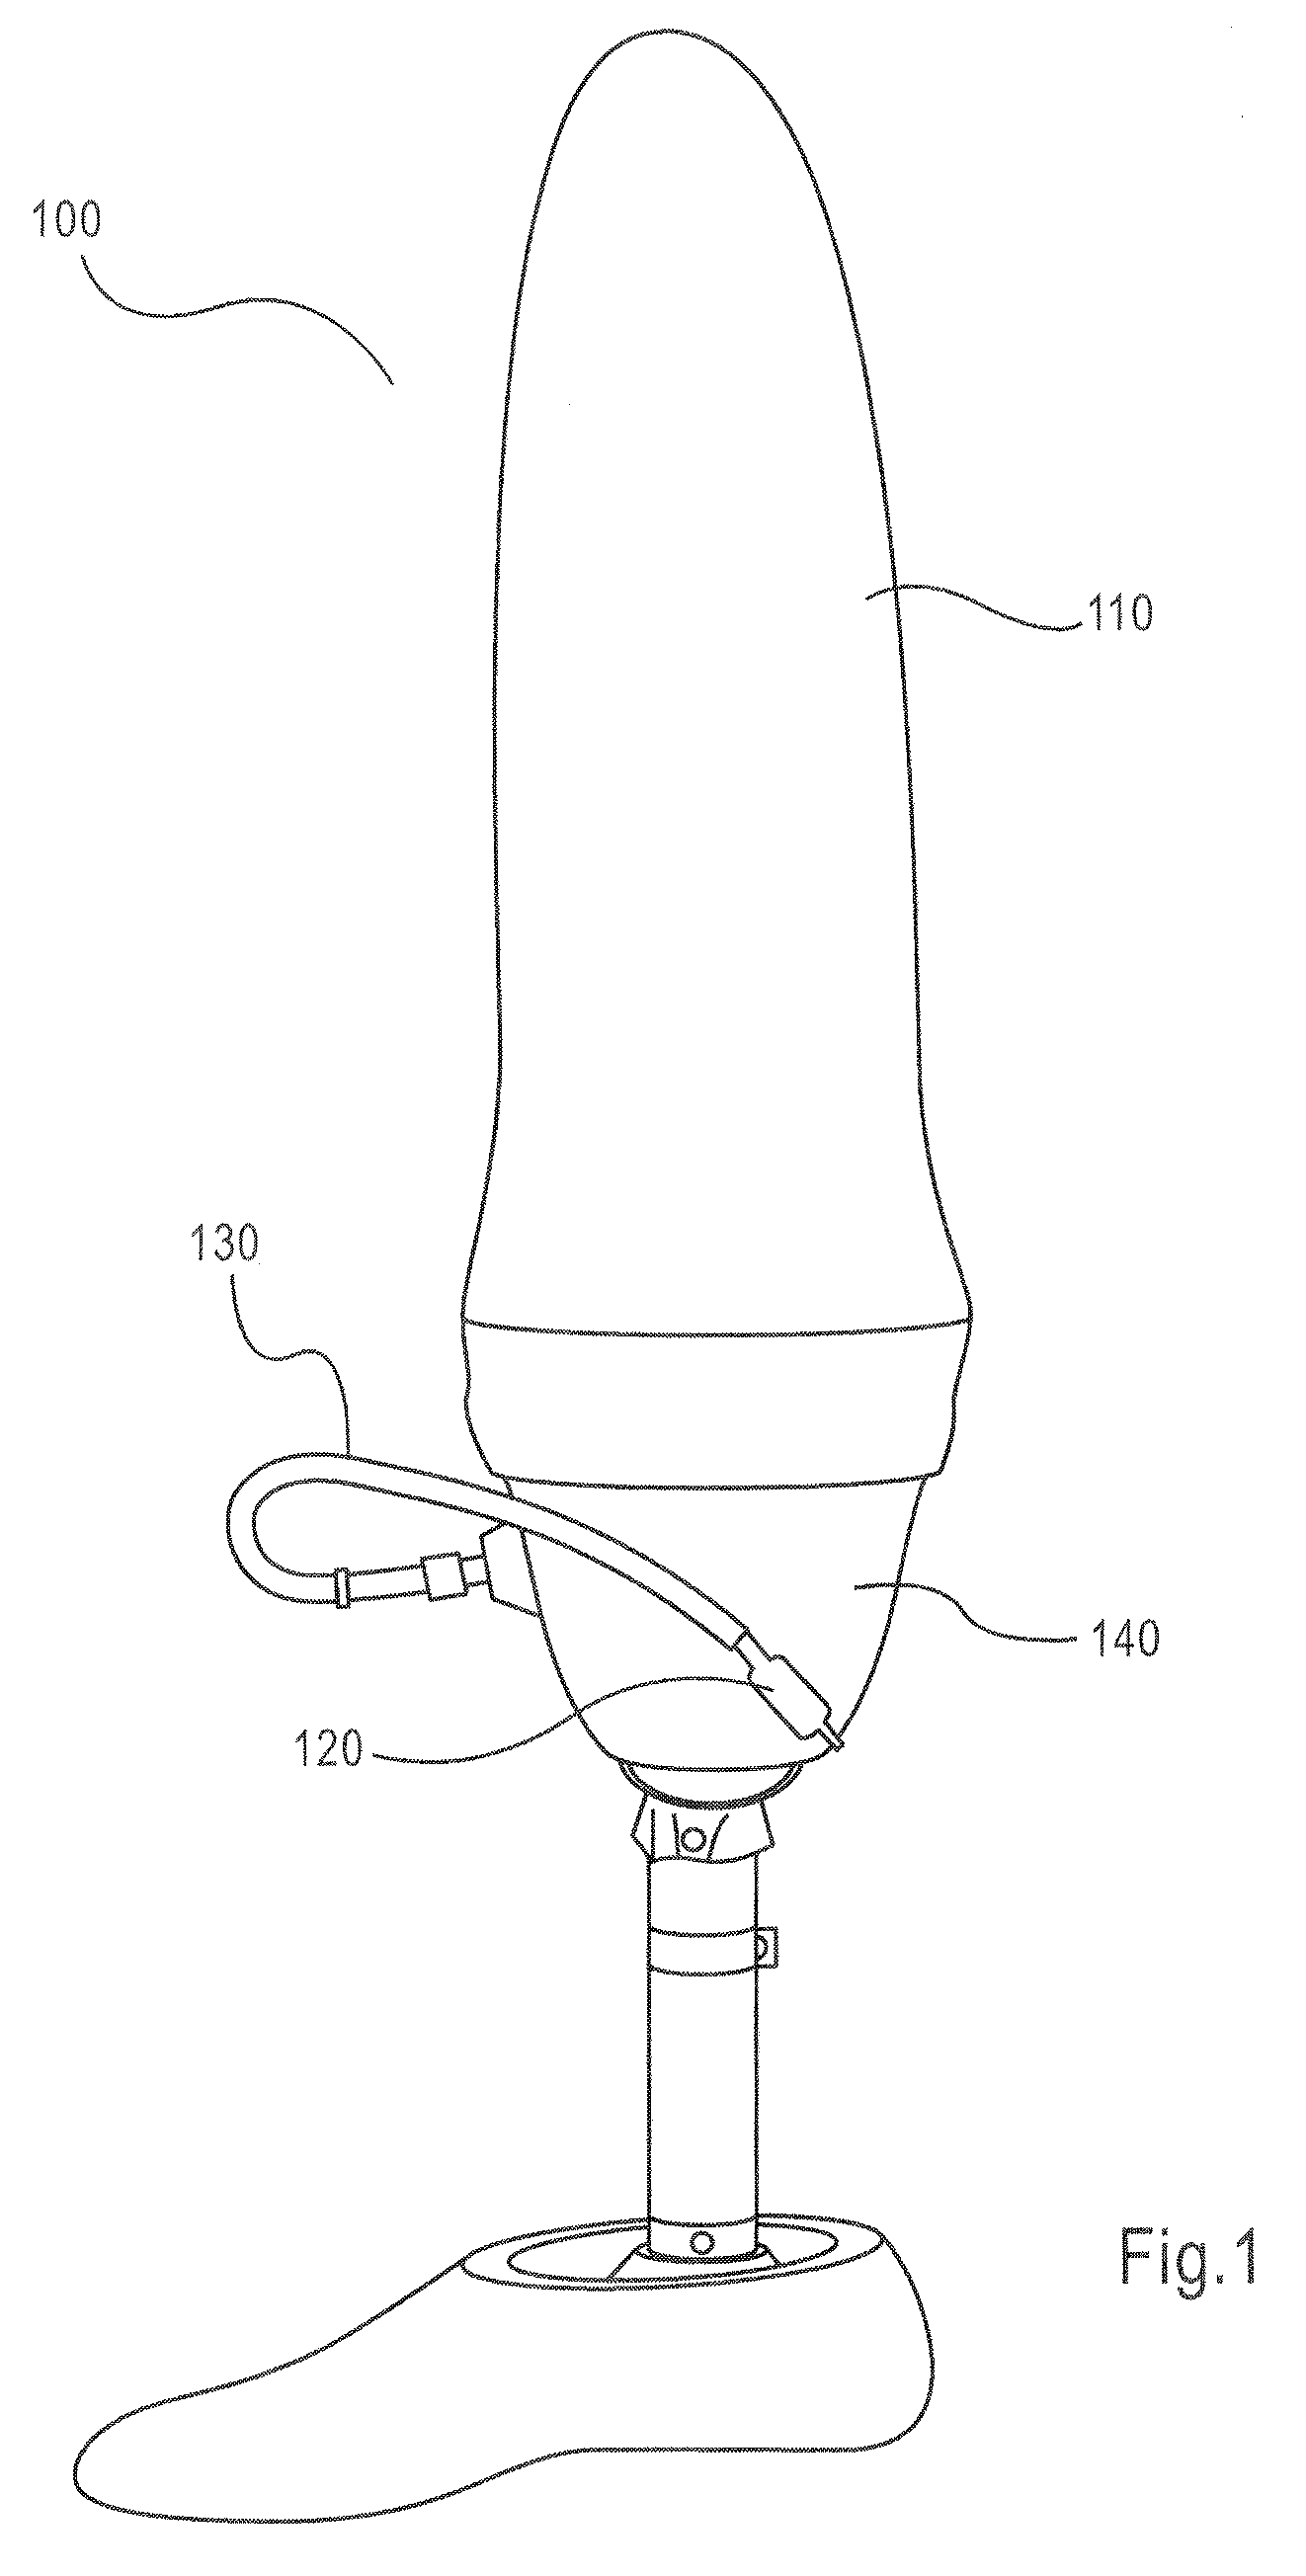 Vacuum based impression and alignment device and method